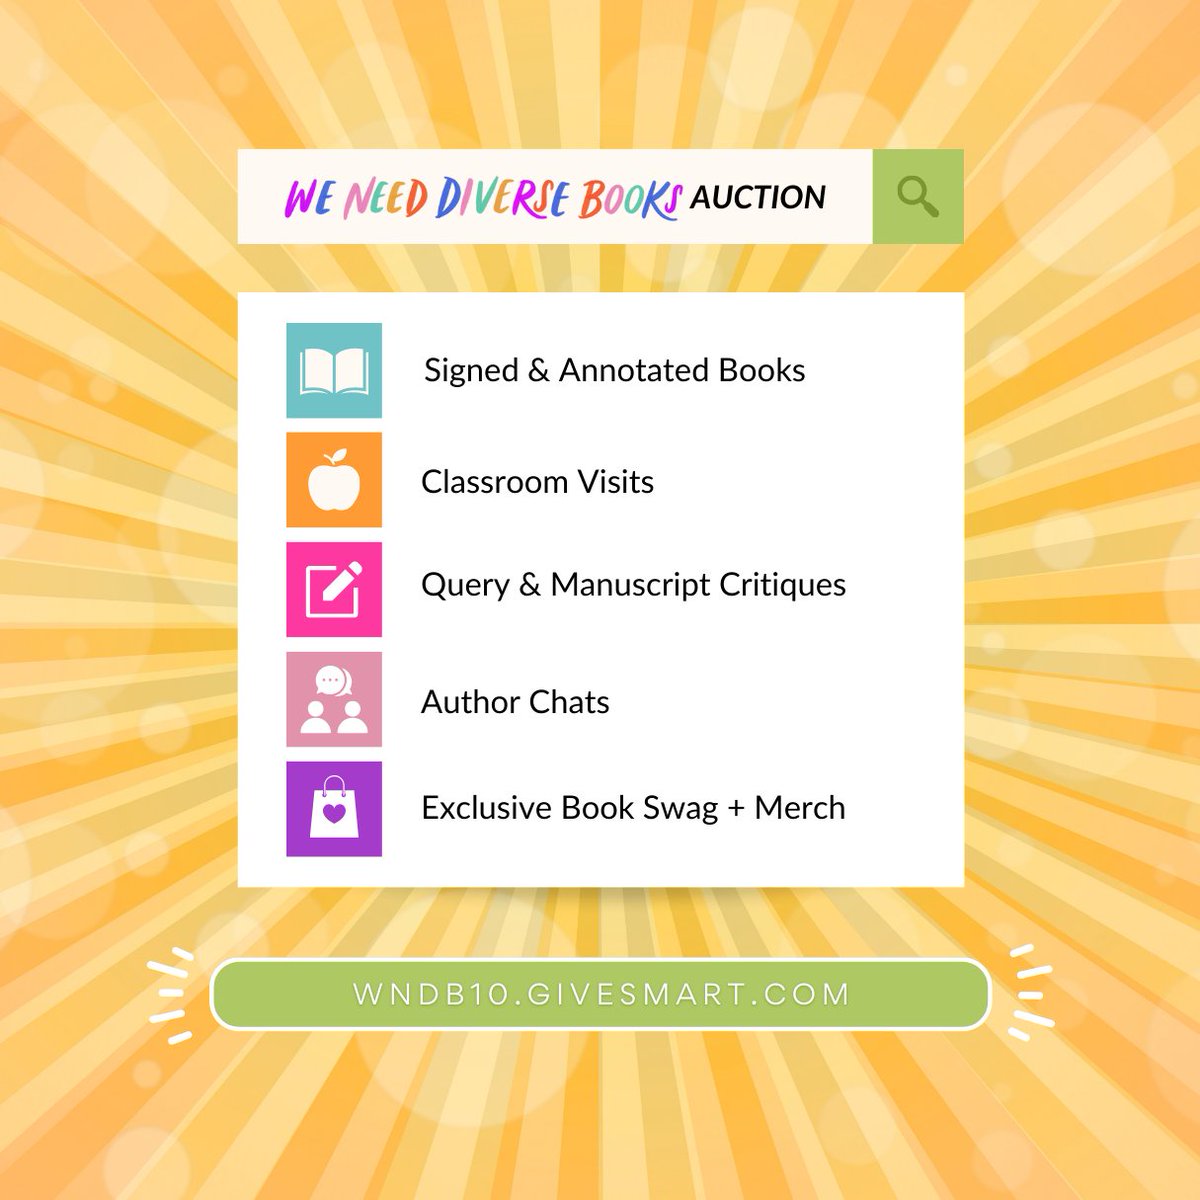 📢 Our 10th Anniversary Auction is officially OPEN! We have classroom visits, author chats, writing critiques, original artwork, and signed/annotated books up for auction—plus so much more 👀 📅 Bidding open: May 16th - May 21st (until 9:00 PM ET) 💻wndb10.givesmart.com